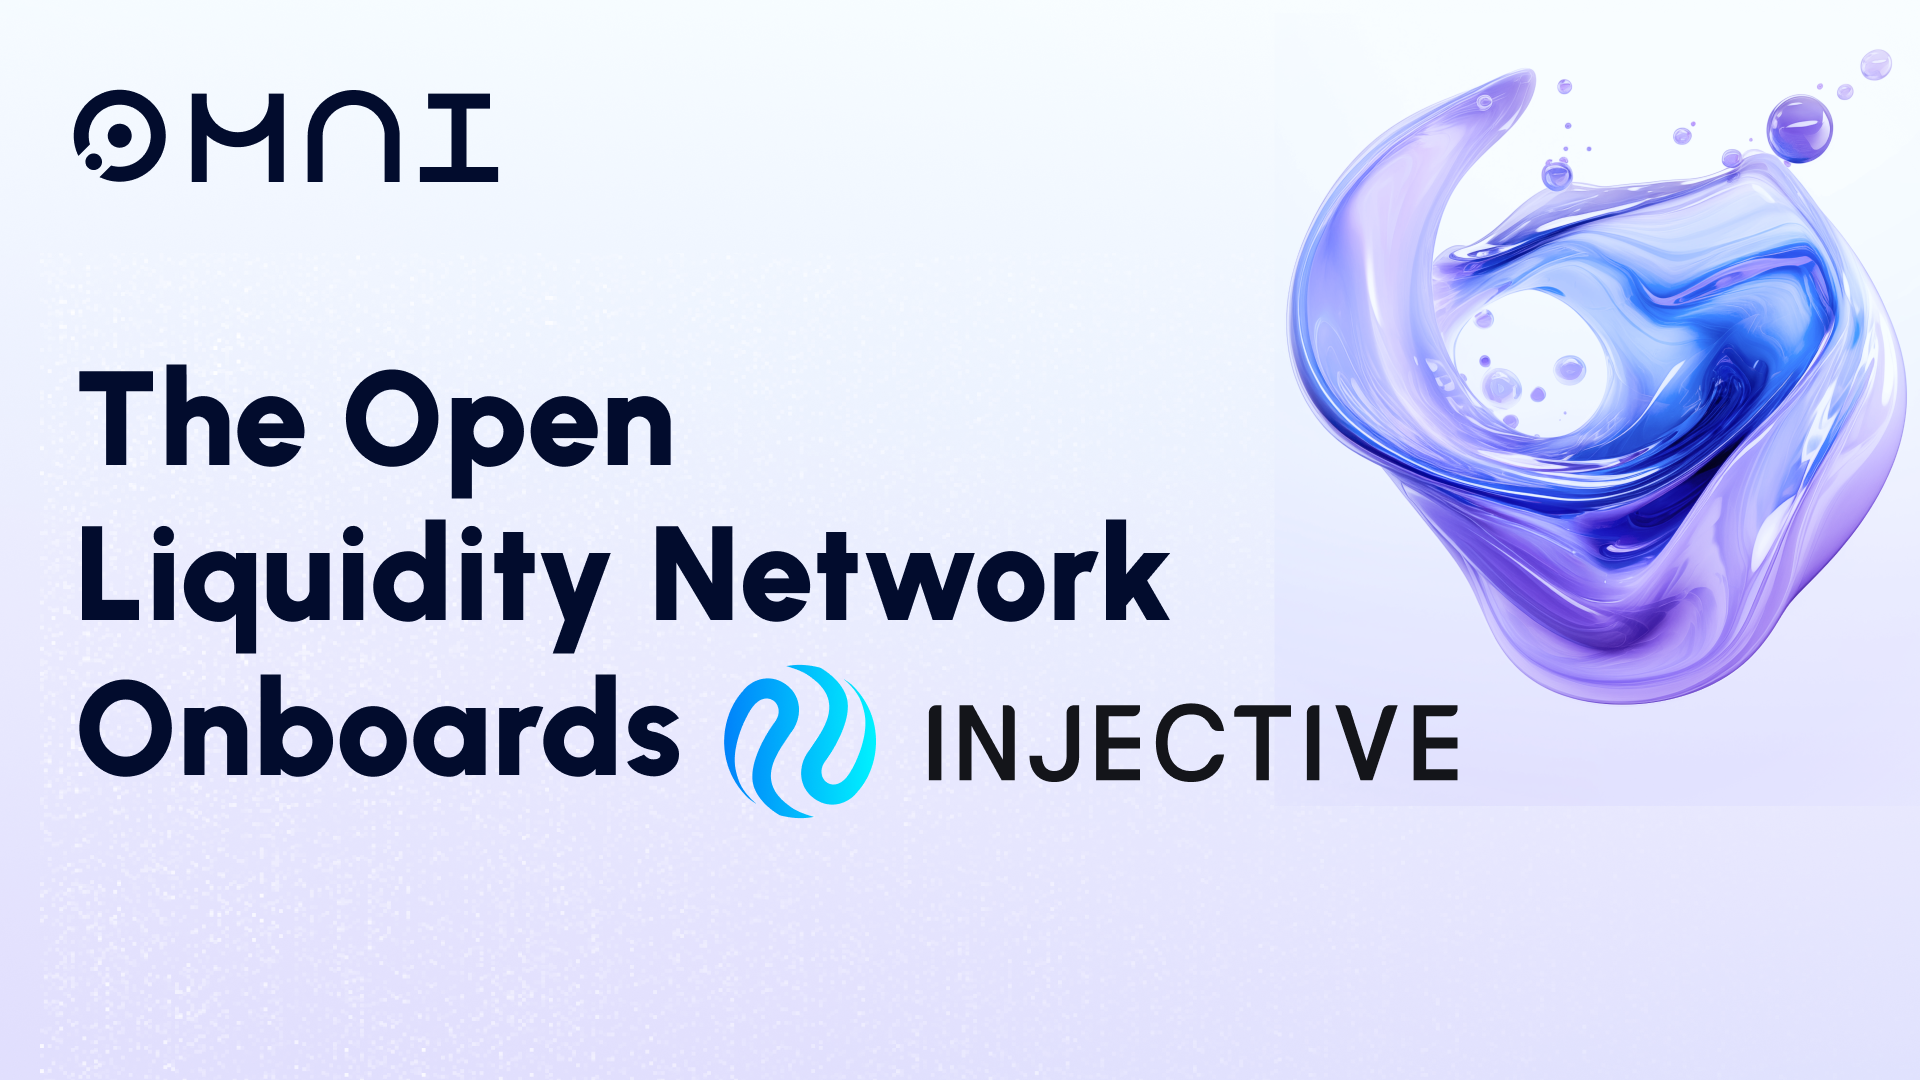 The Open Liquidity Network Onboards Injective